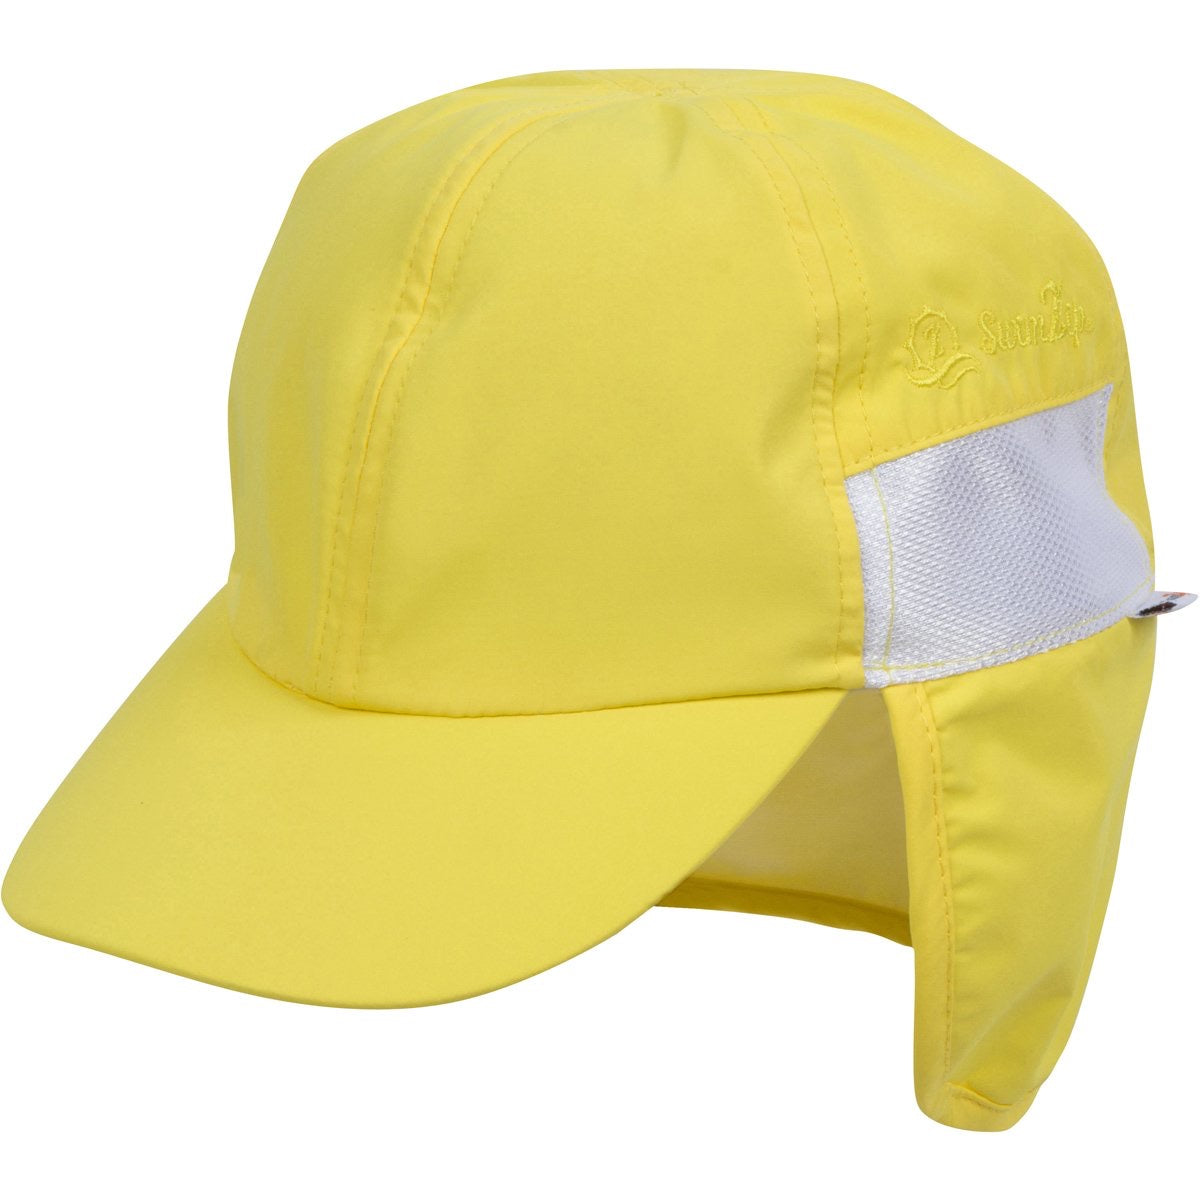 UV protective Legionnaire Style Sun Hat with Face Cover UPF 50+